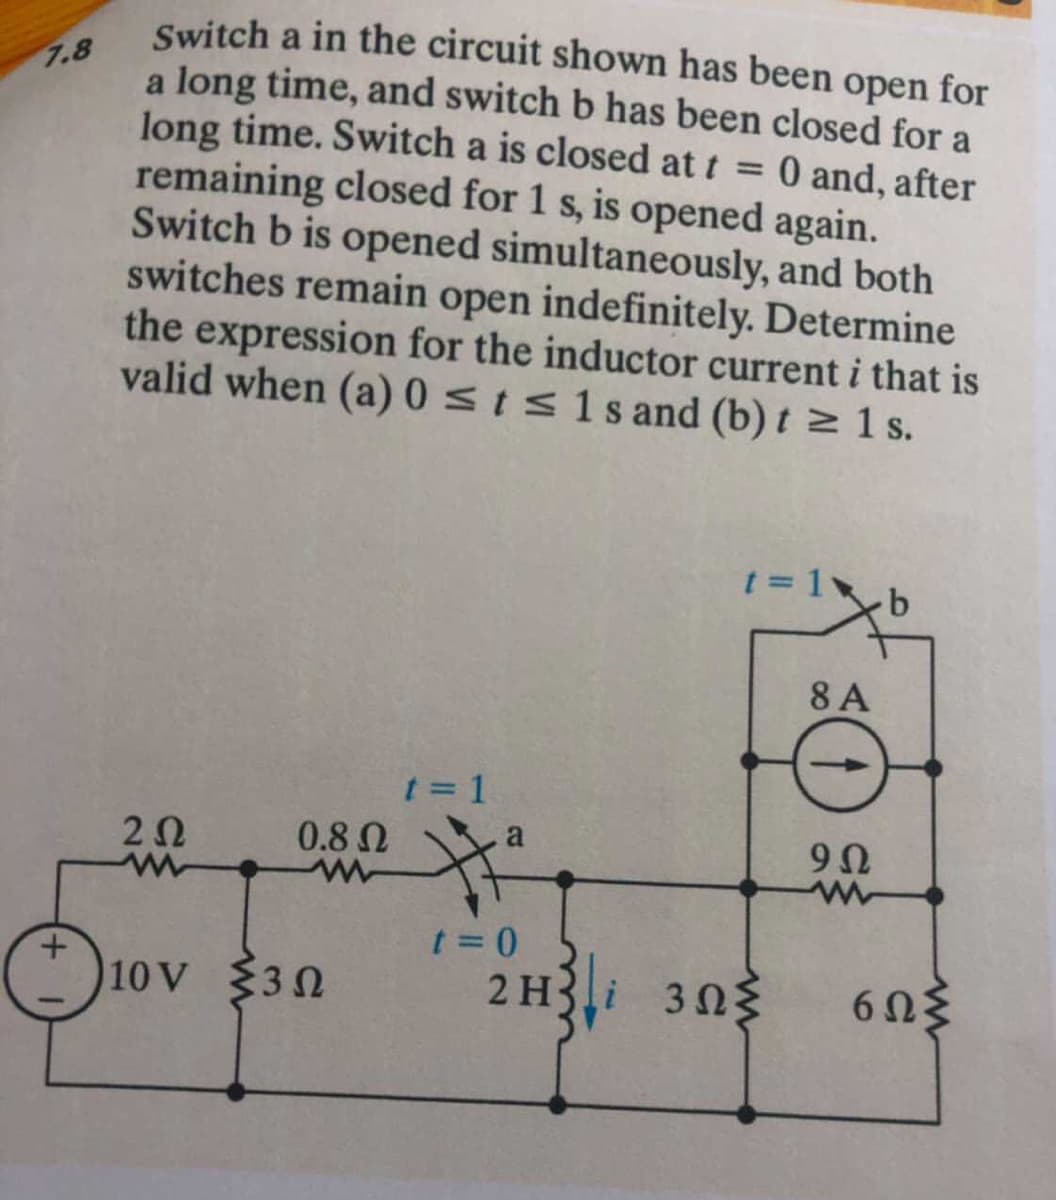 Switch a in the circuit shown has been open for
a long time, and switch b has been closed for a
long time. Switch a is closed at t = 0 and, after
remaining closed for 1 s, is opened again.
Switch b is opened simultaneously, and both
switches remain open indefinitely. Determine
the expression for the inductor current i that is
valid when (a) 0 sis1s and (b) t z 1 s.
7.8
t = 1
8 A
t = 1
0.8 0
20
t = 0
2 H3i 303
10 V 30
6Ωξ
